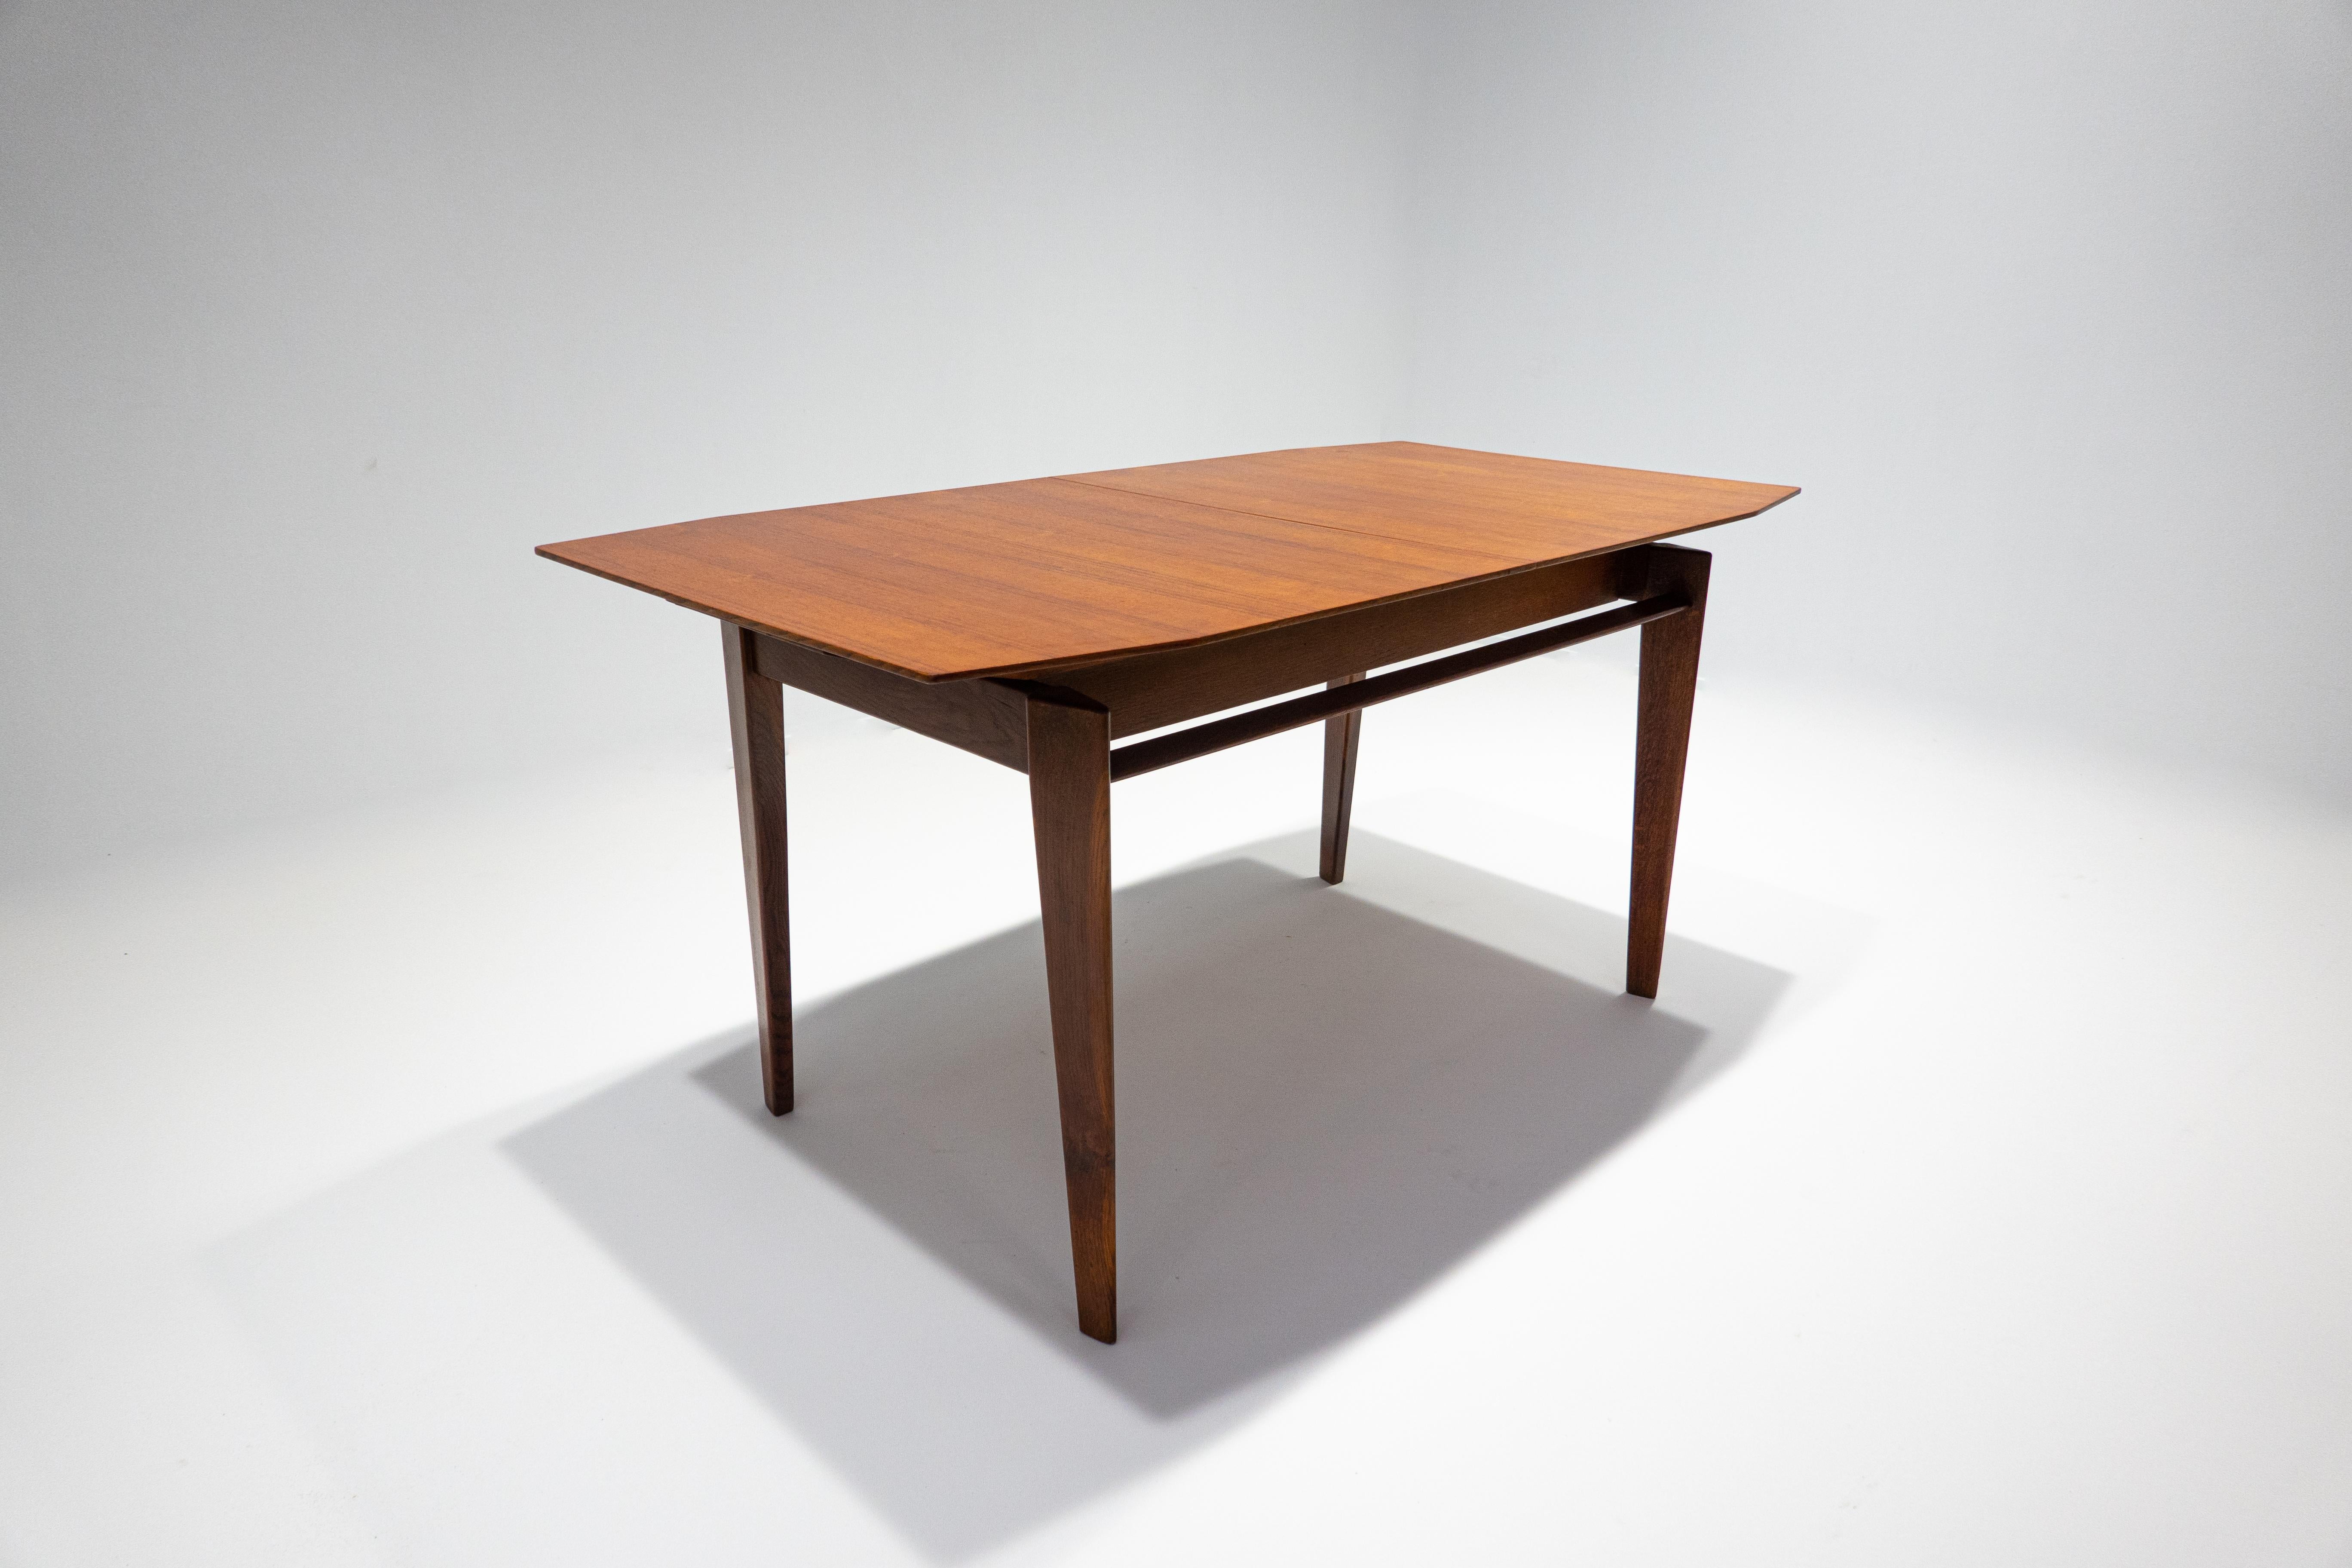 Mid-Century Modern extendable dining table by Vittorio Dassi, Teak, Italy, 1950s

Measures: W : 159.5 cm to 219.5 cm.